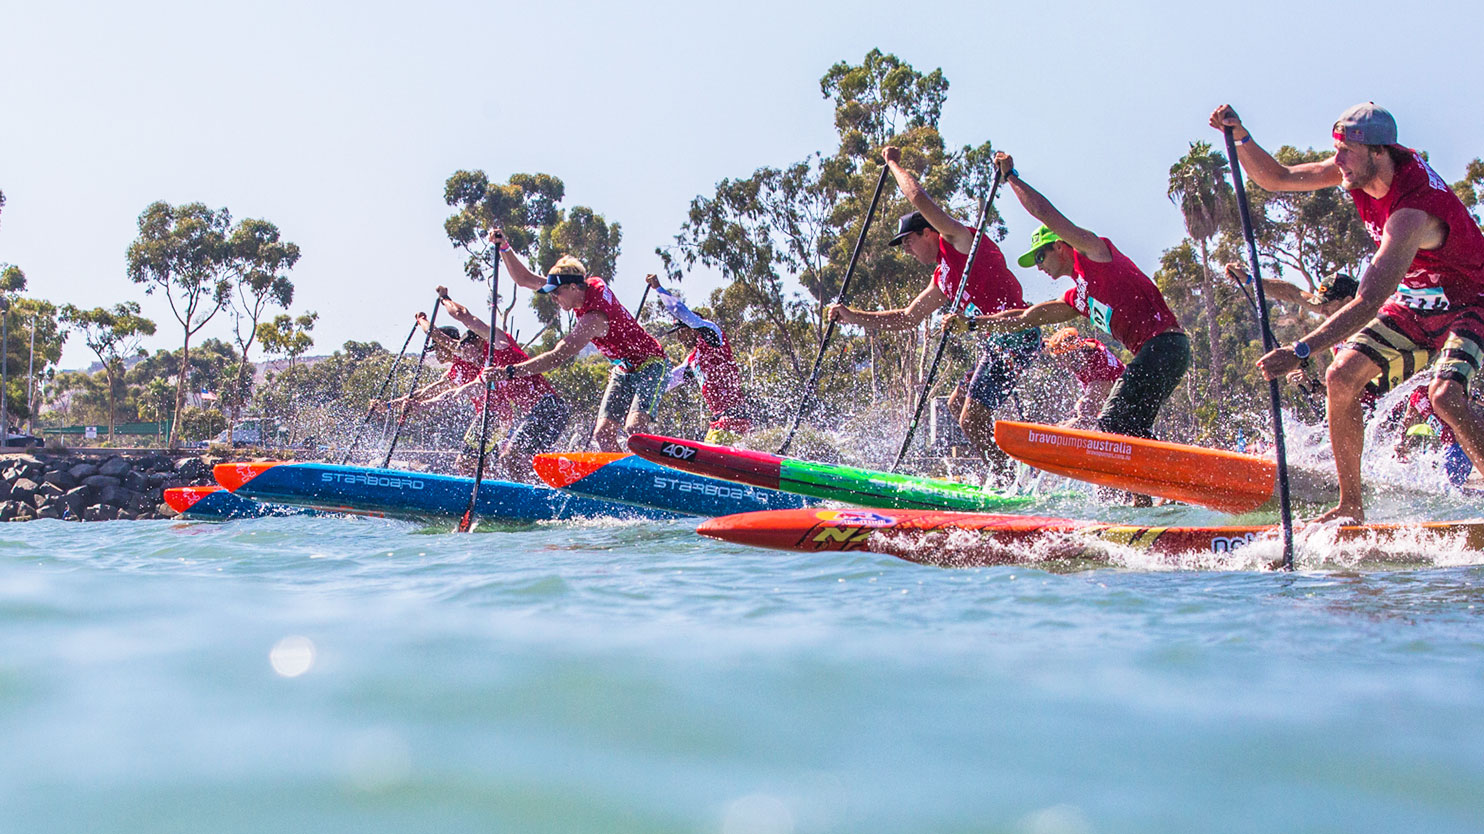 stand up paddle boards racing